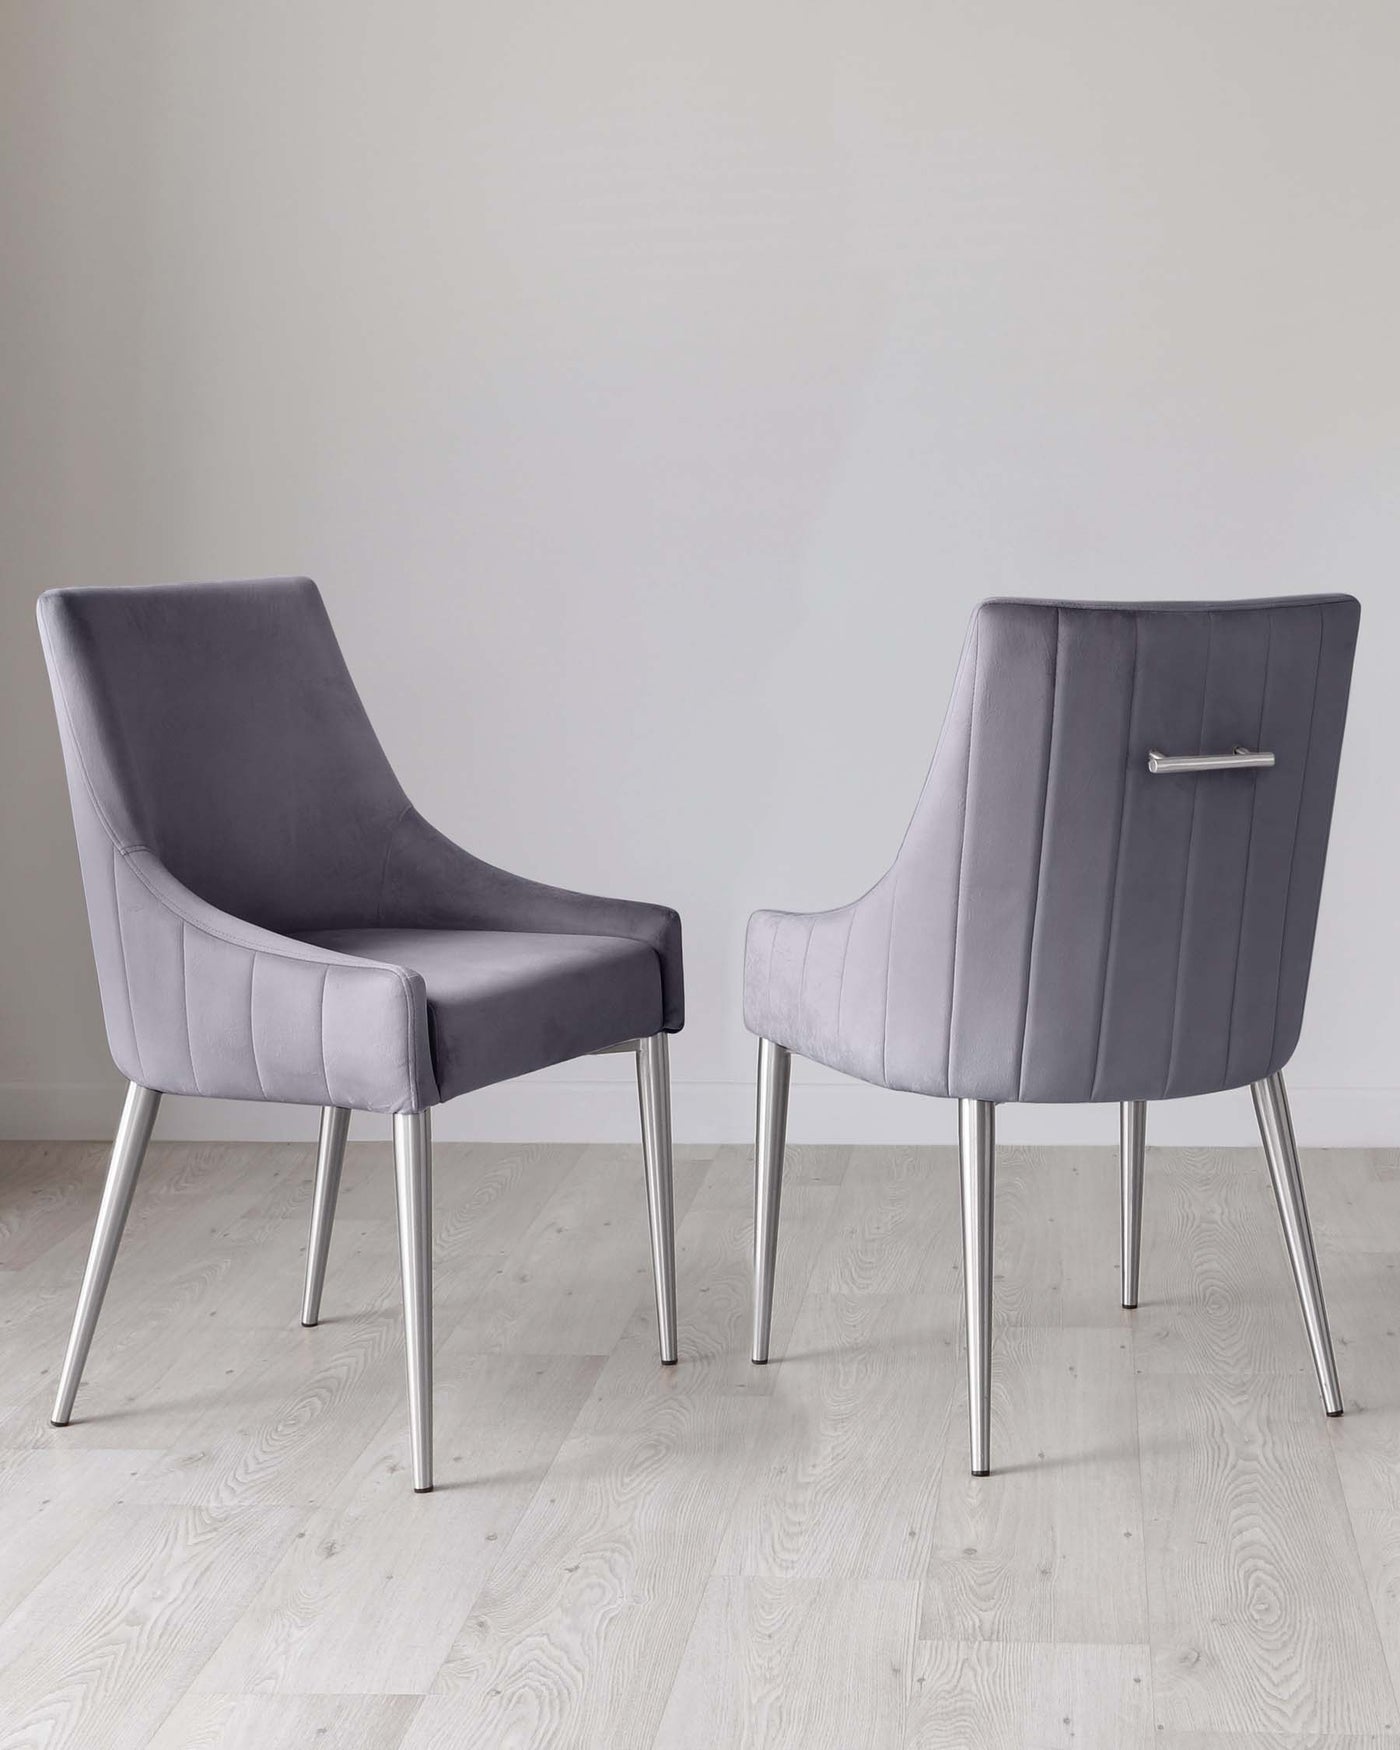 Two modern dining chairs with sleek grey upholstery and horizontal channel tufting. The chairs have slightly curved backrests and are supported by polished chrome legs. The design presents a blend of comfort and contemporary elegance, displayed on a light hardwood floor against a white wall background.